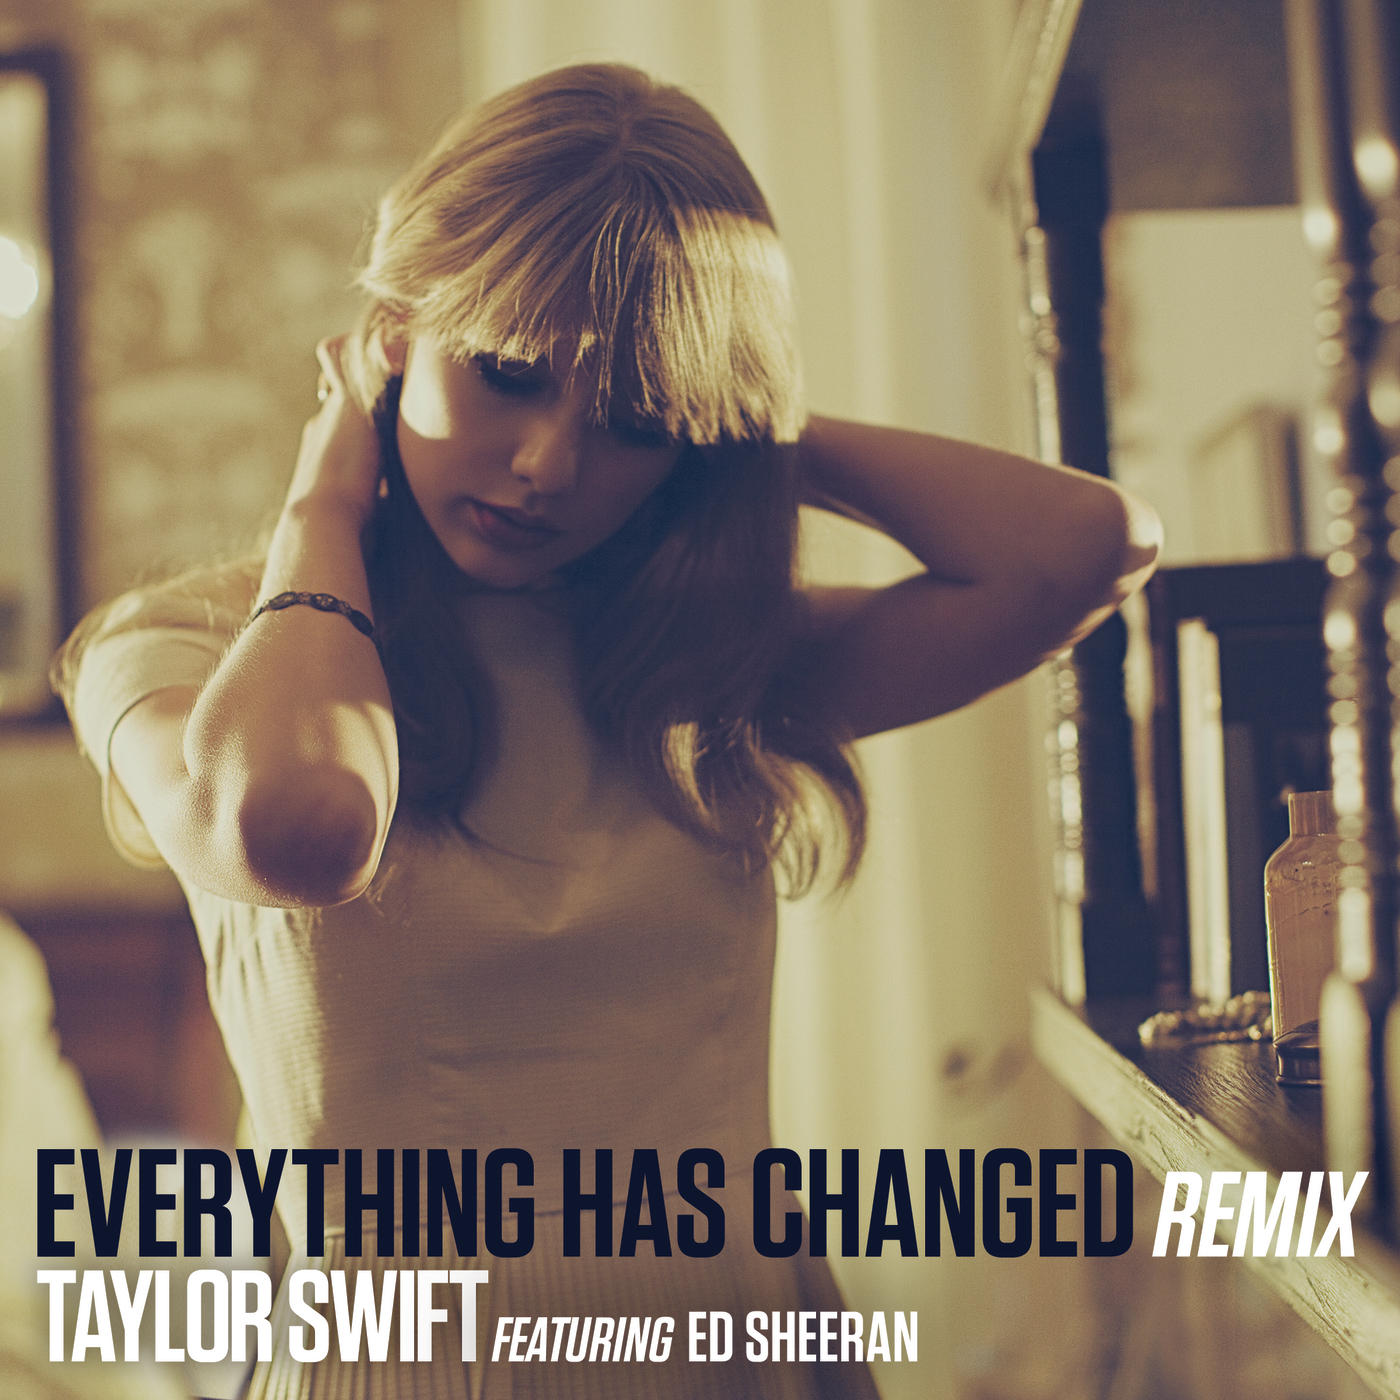 EVERYTHING HAS CHANGED cover art